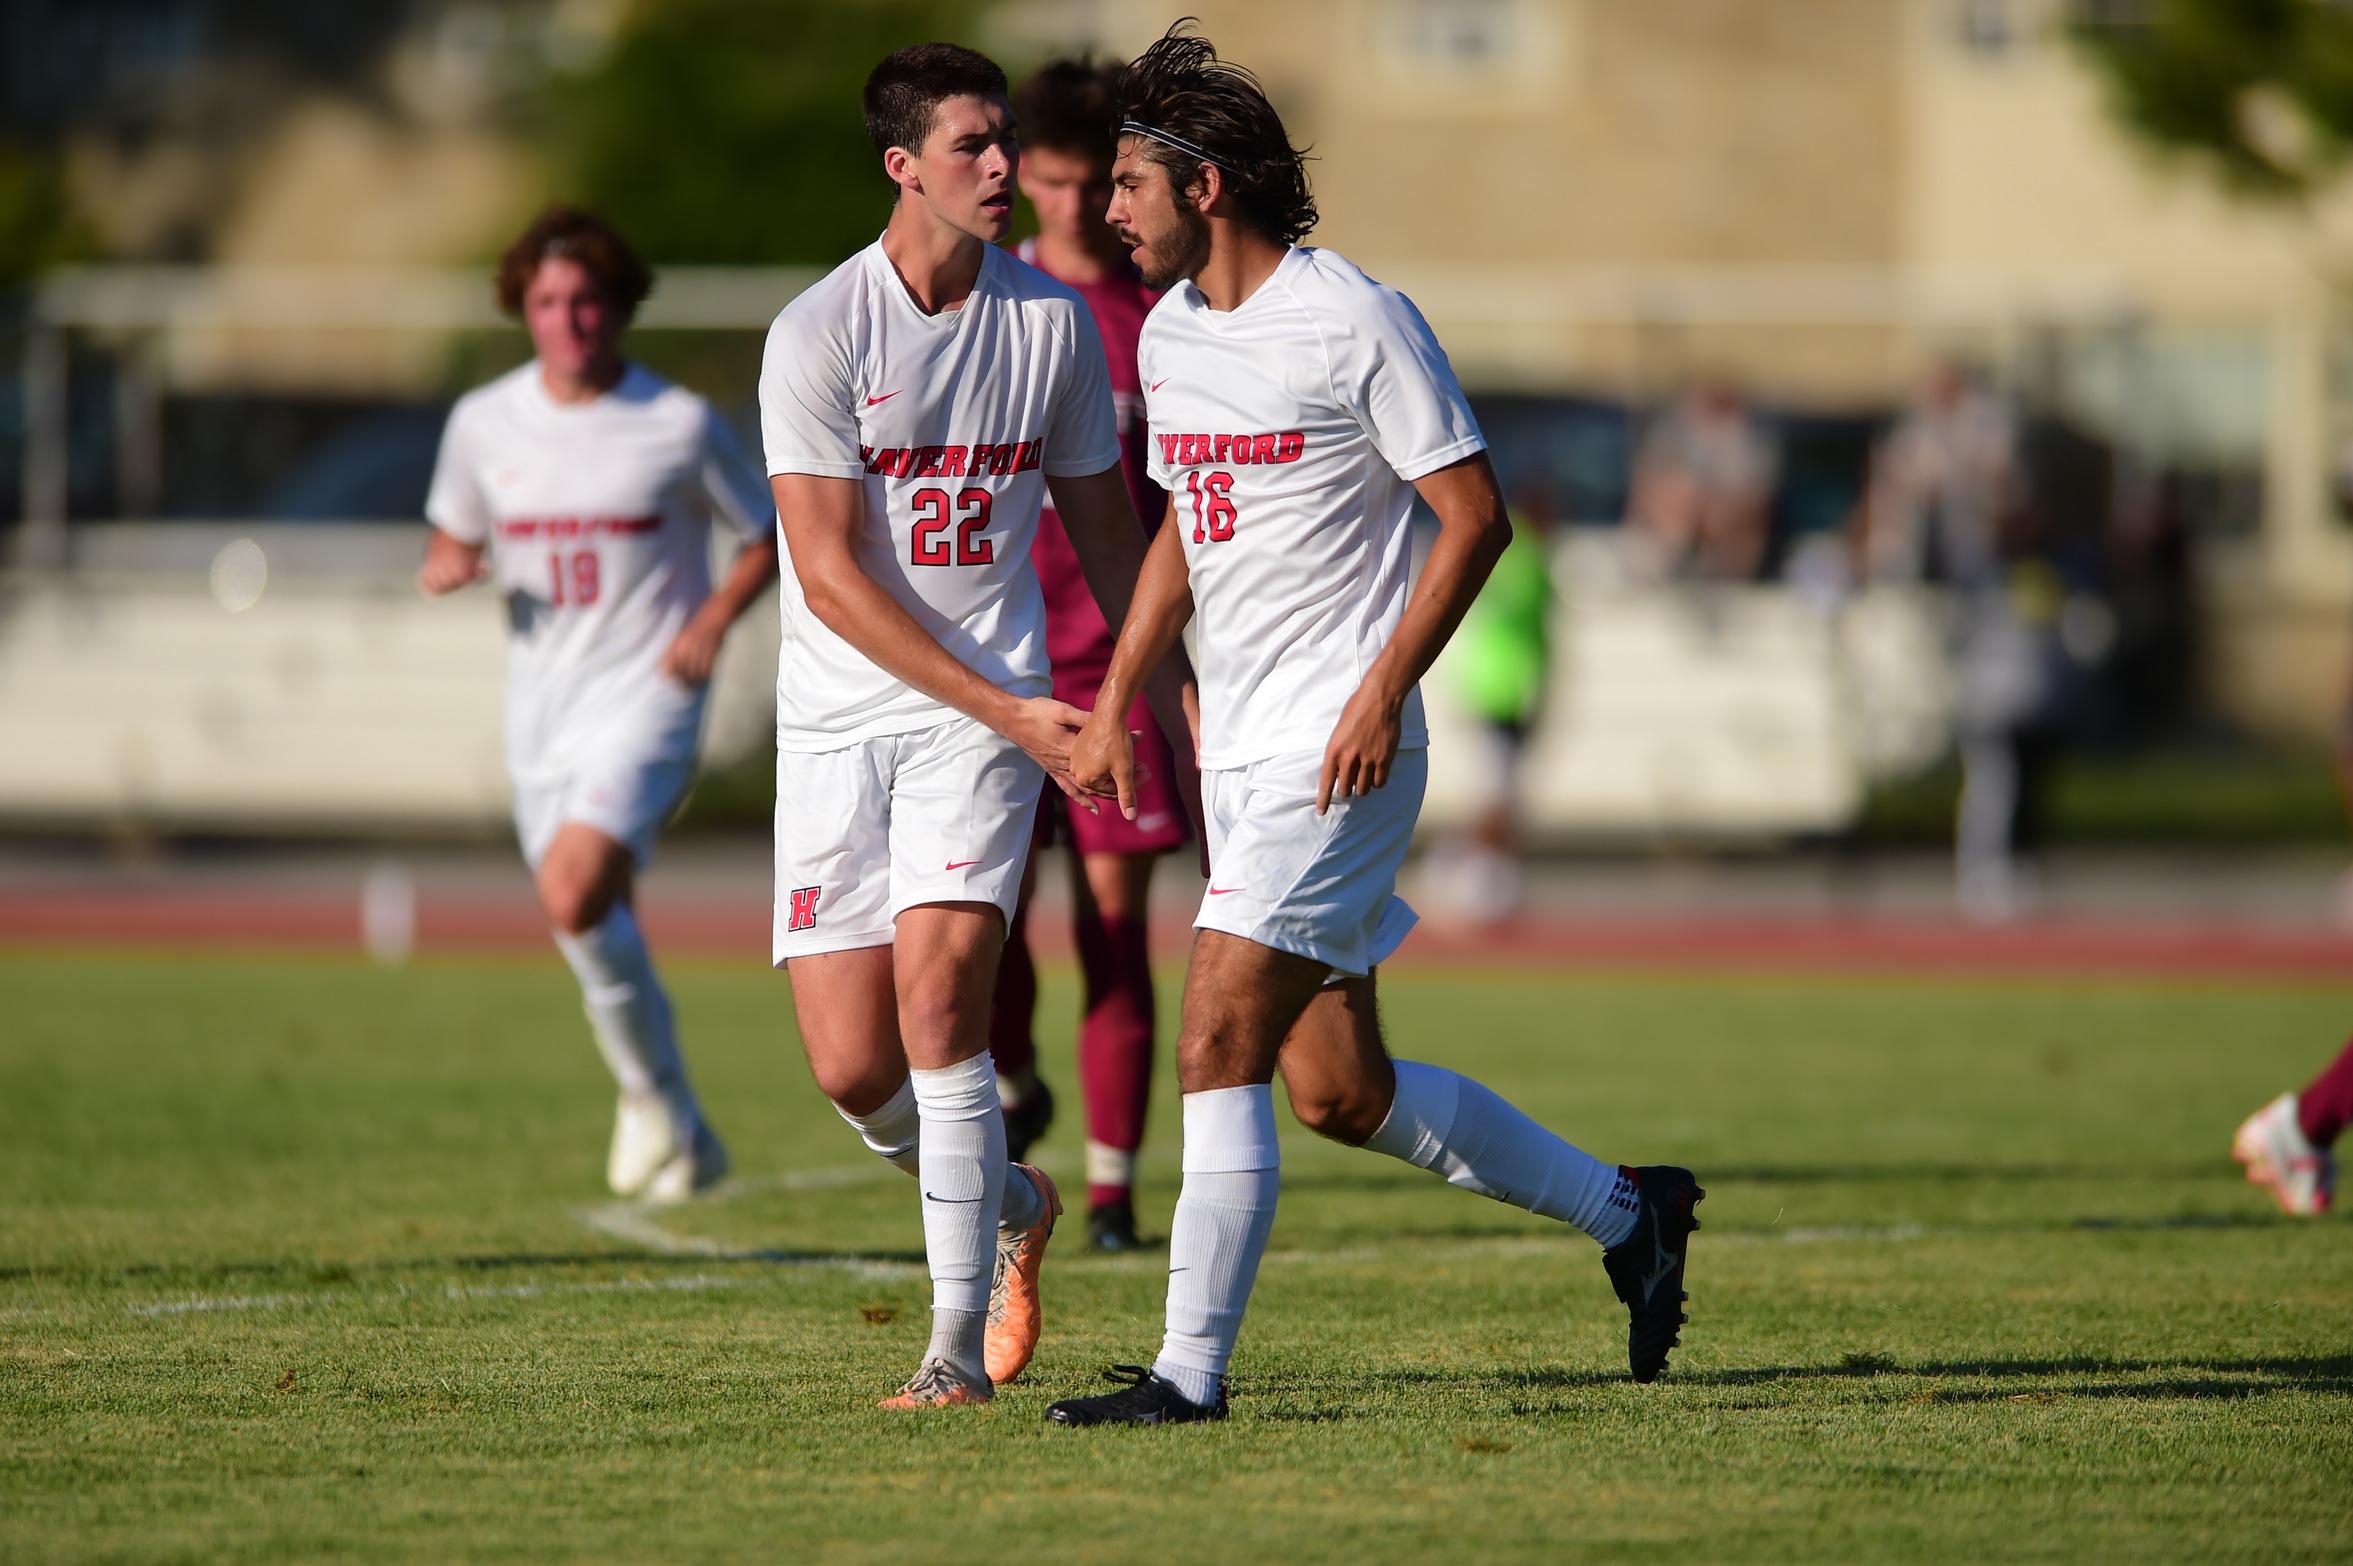 Men's Soccer Settles for Draw at Susquehanna, 2-2